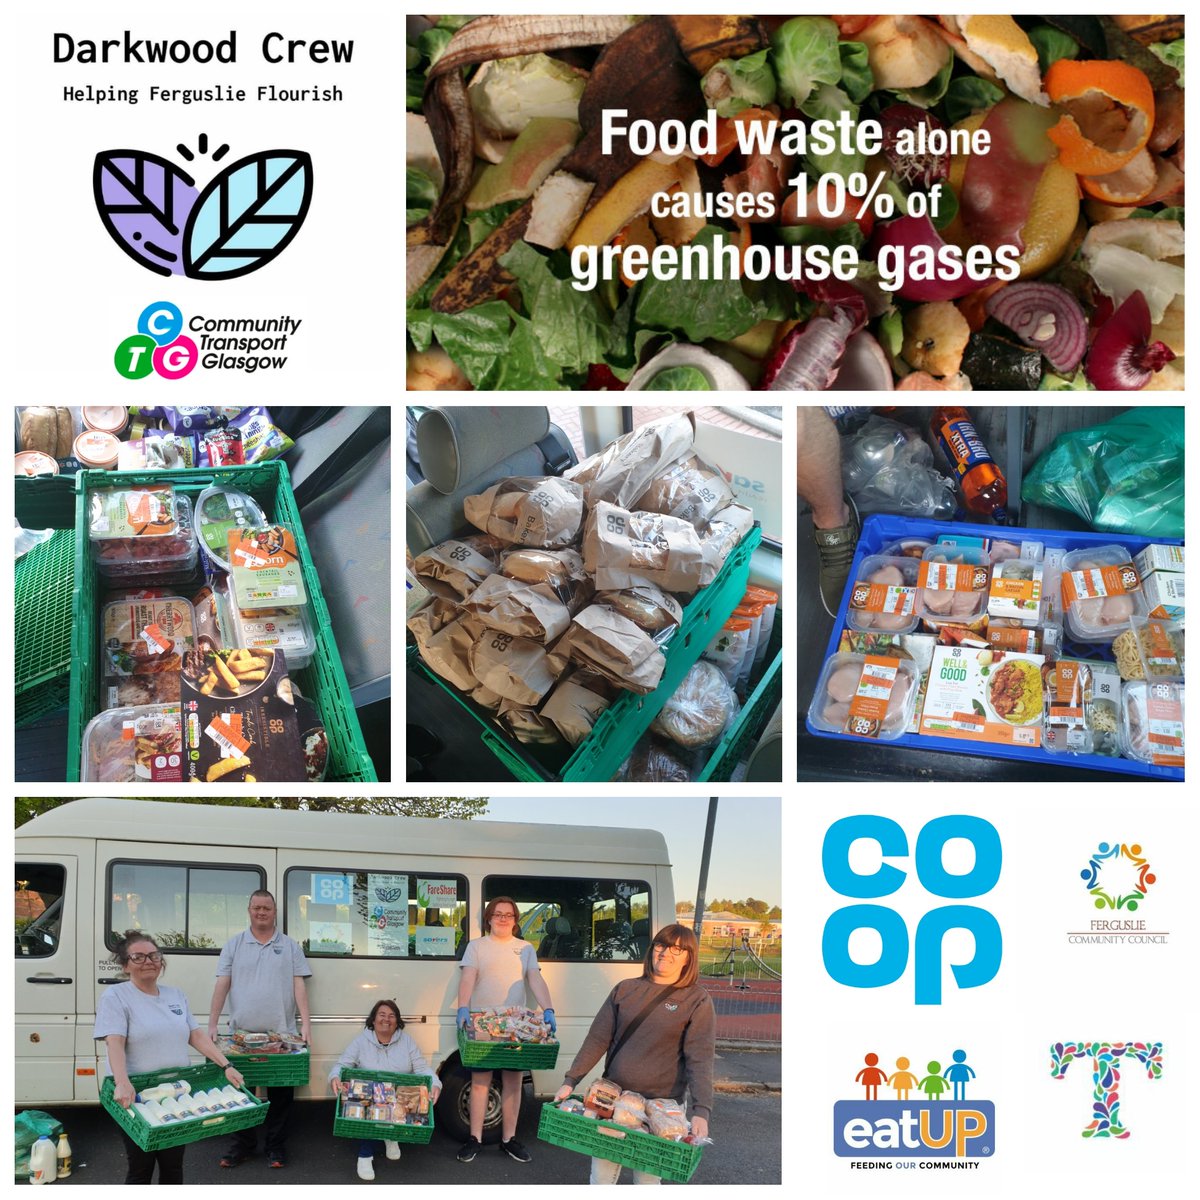 Our commitment to our #LocalEnviromment has allowed us to address #FoodInsecurity locally & contribute positively to the global #ClimateChangeChallenge. So far we've saved 2.65 tonnes of surplus food from going to #Landfill #GreenFerguslie #SustainableCommunity #JoiningUpTheDots